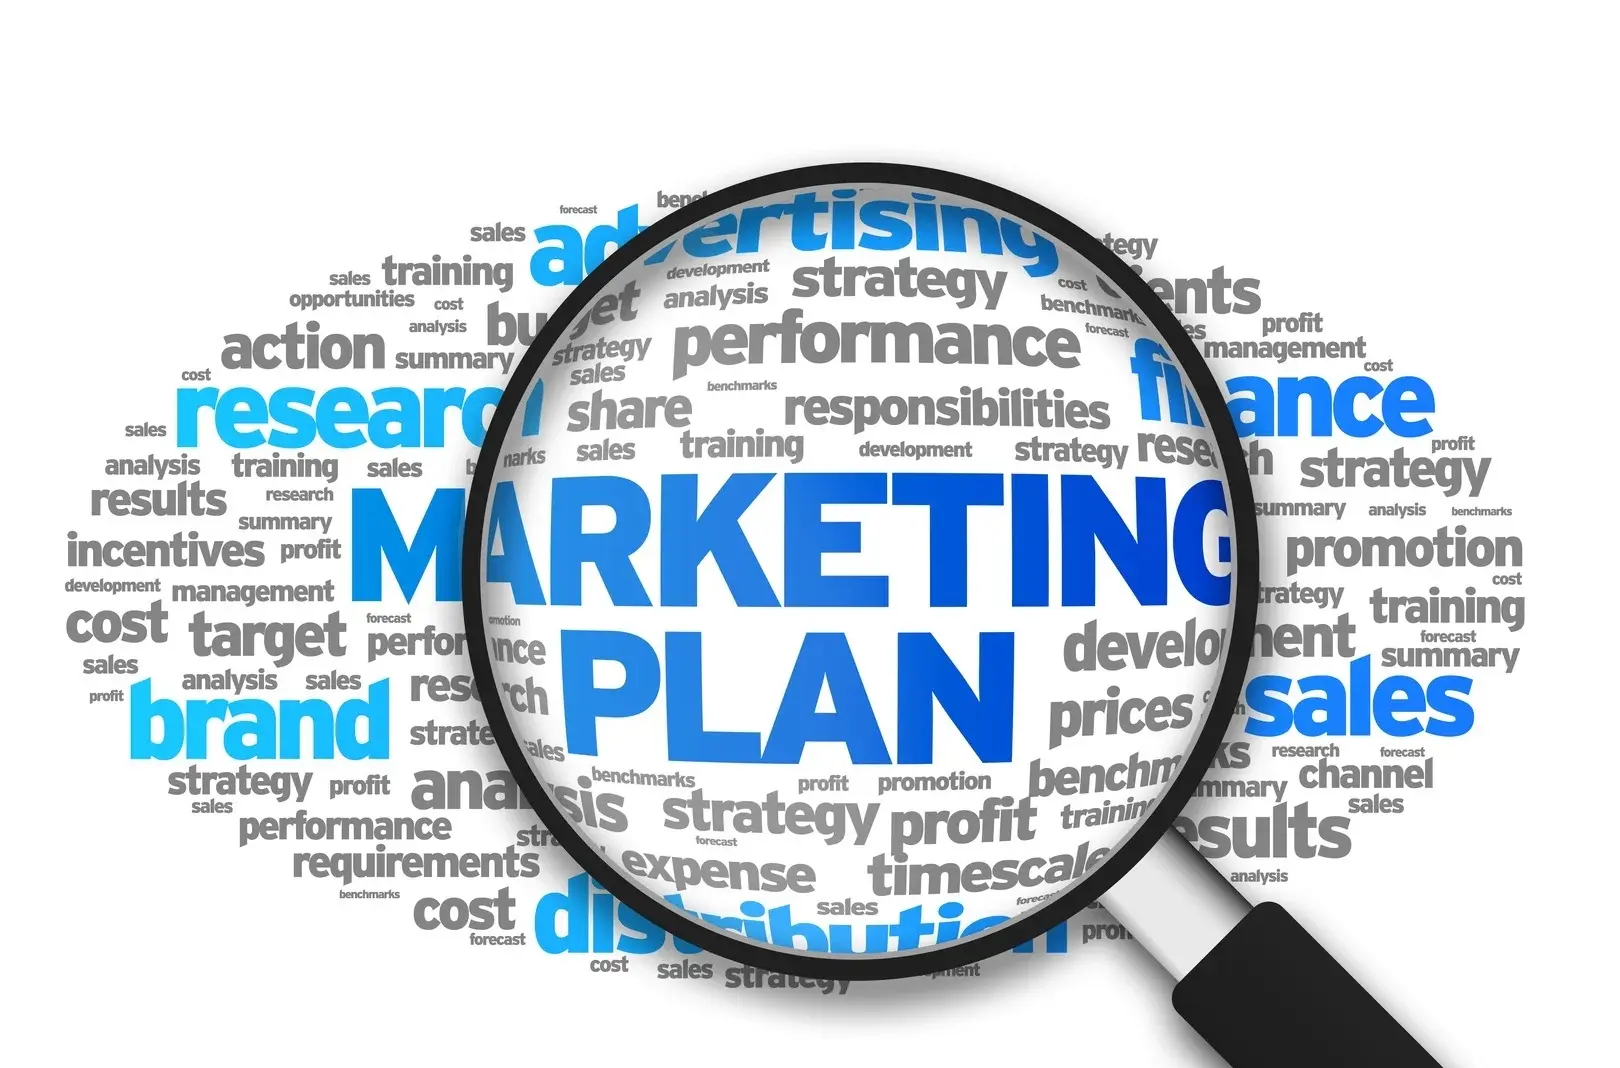 What is e marketing plan